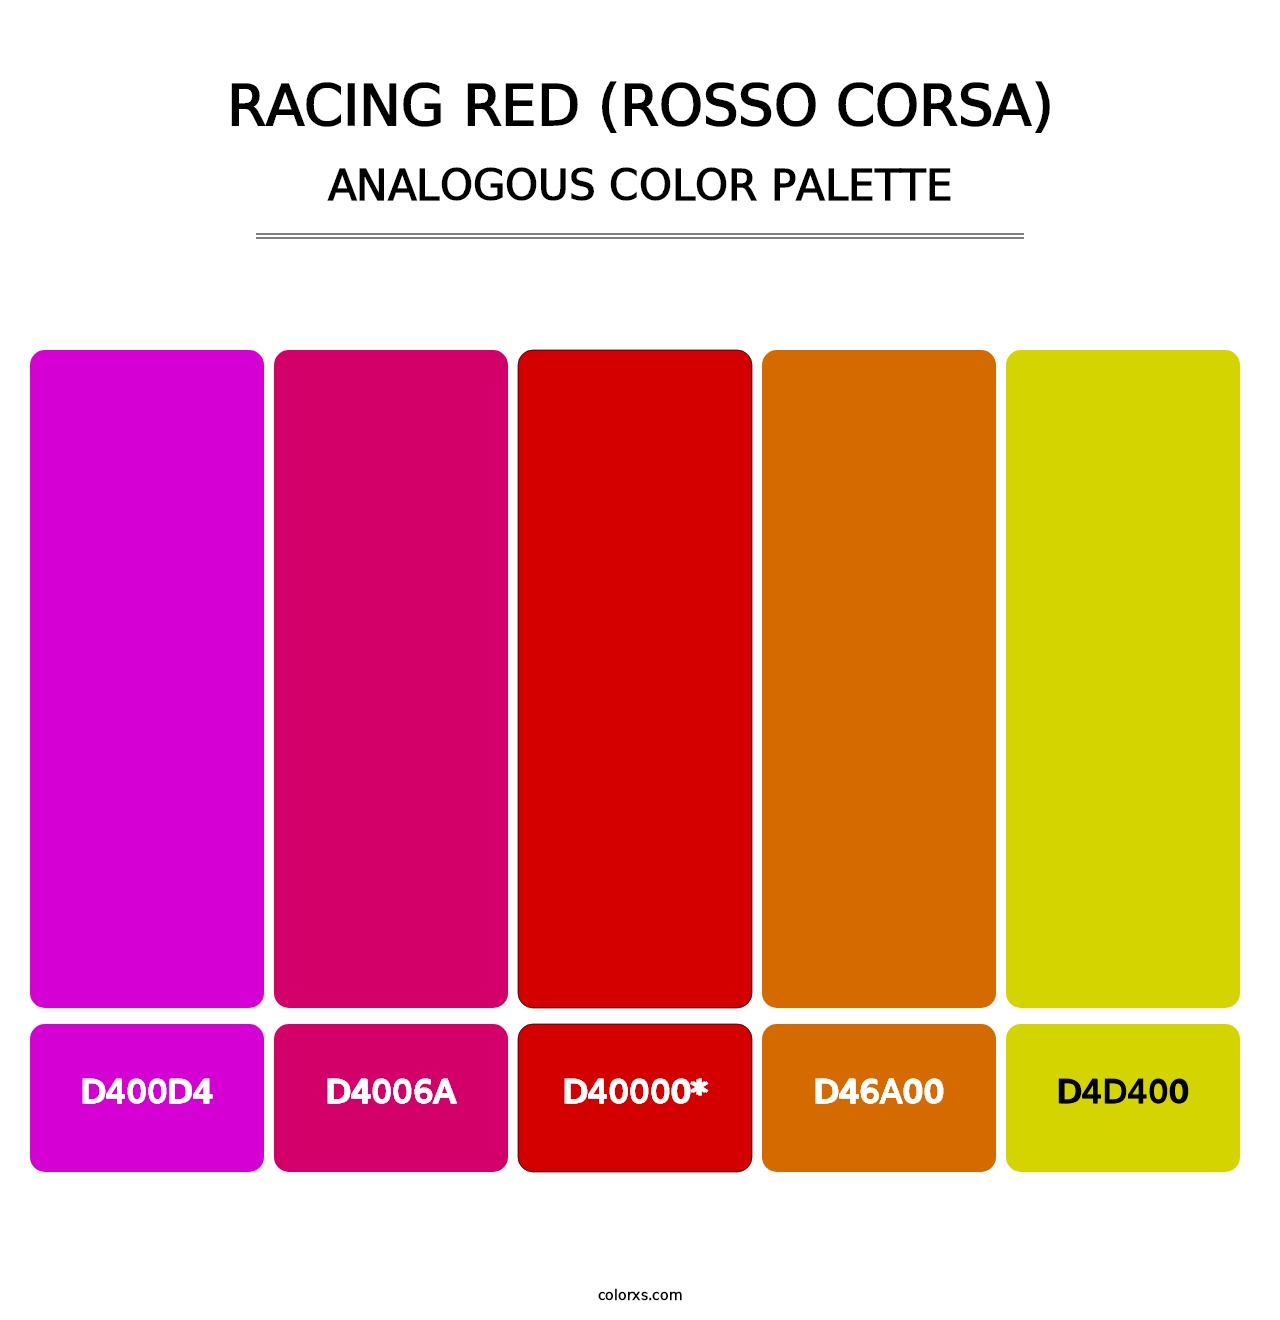 Racing Red (Rosso Corsa) - Analogous Color Palette